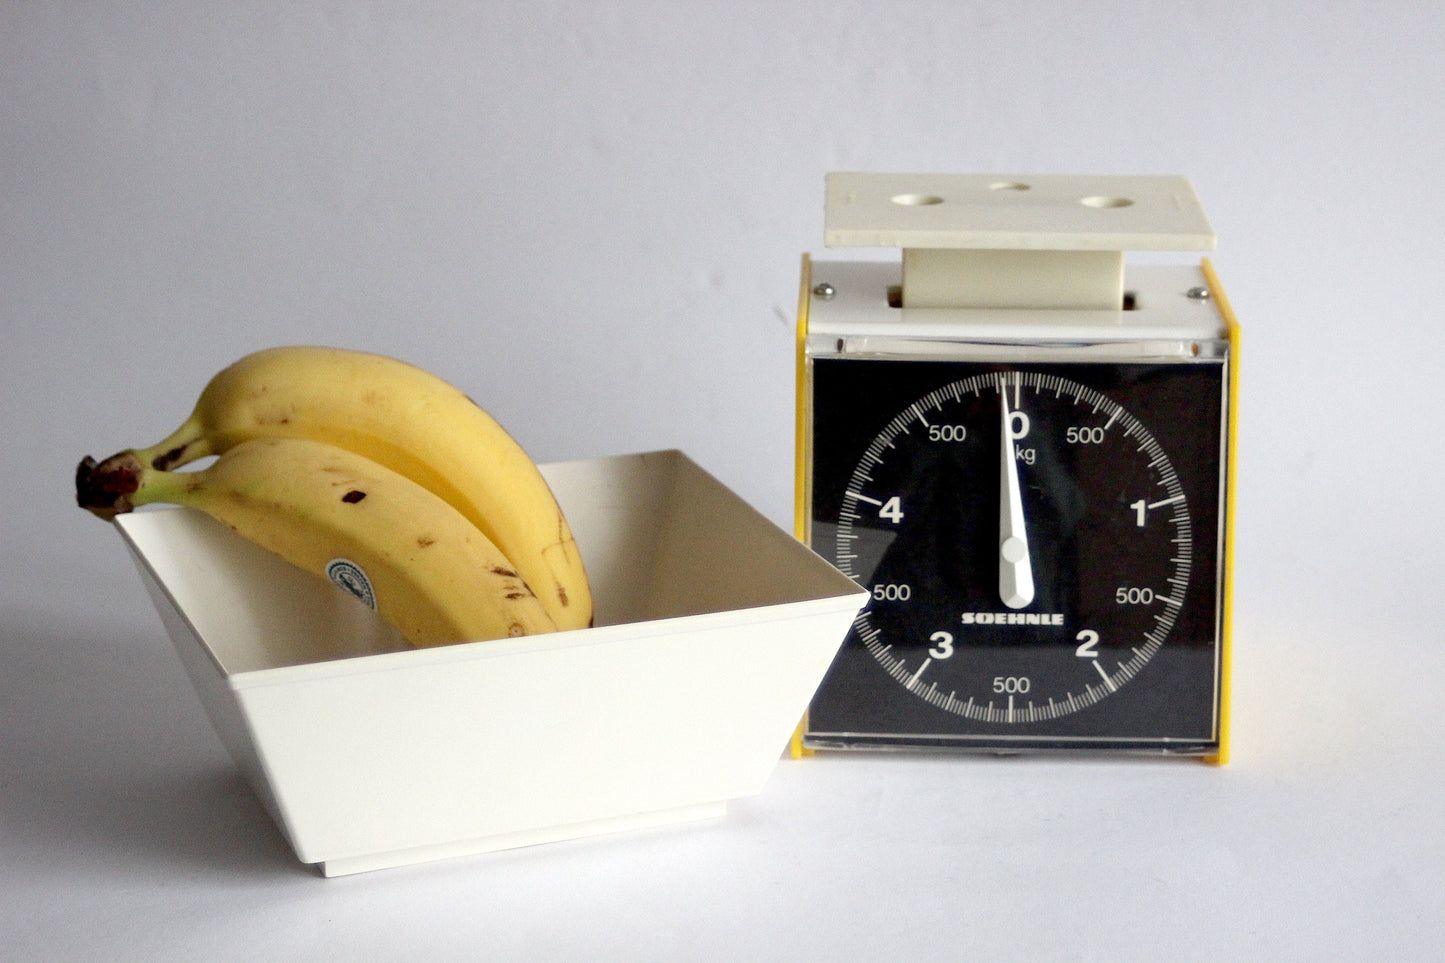 SOEHNLE Space age vintage kitchen scale. Yellow and white. Model 1200. Germany, 70s.